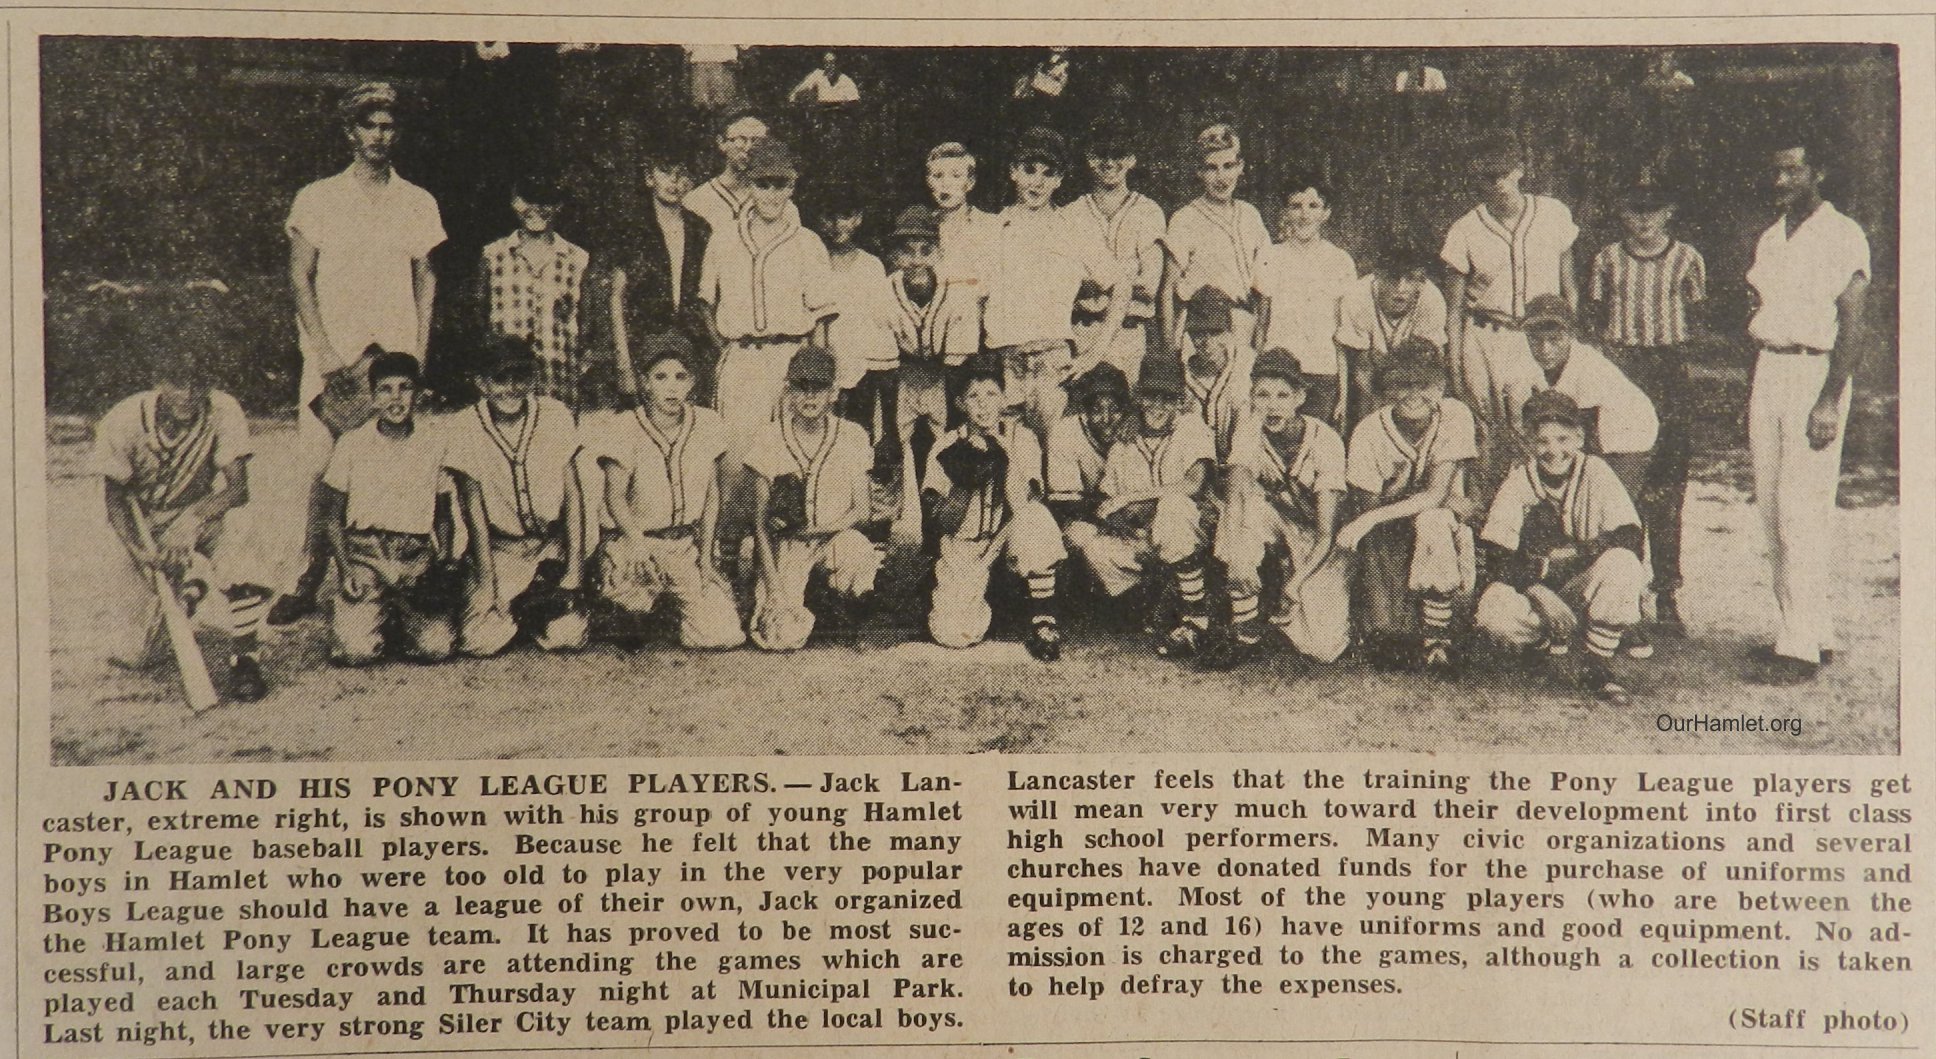 1954 Jack Lancaster and Pony players OH.jpg